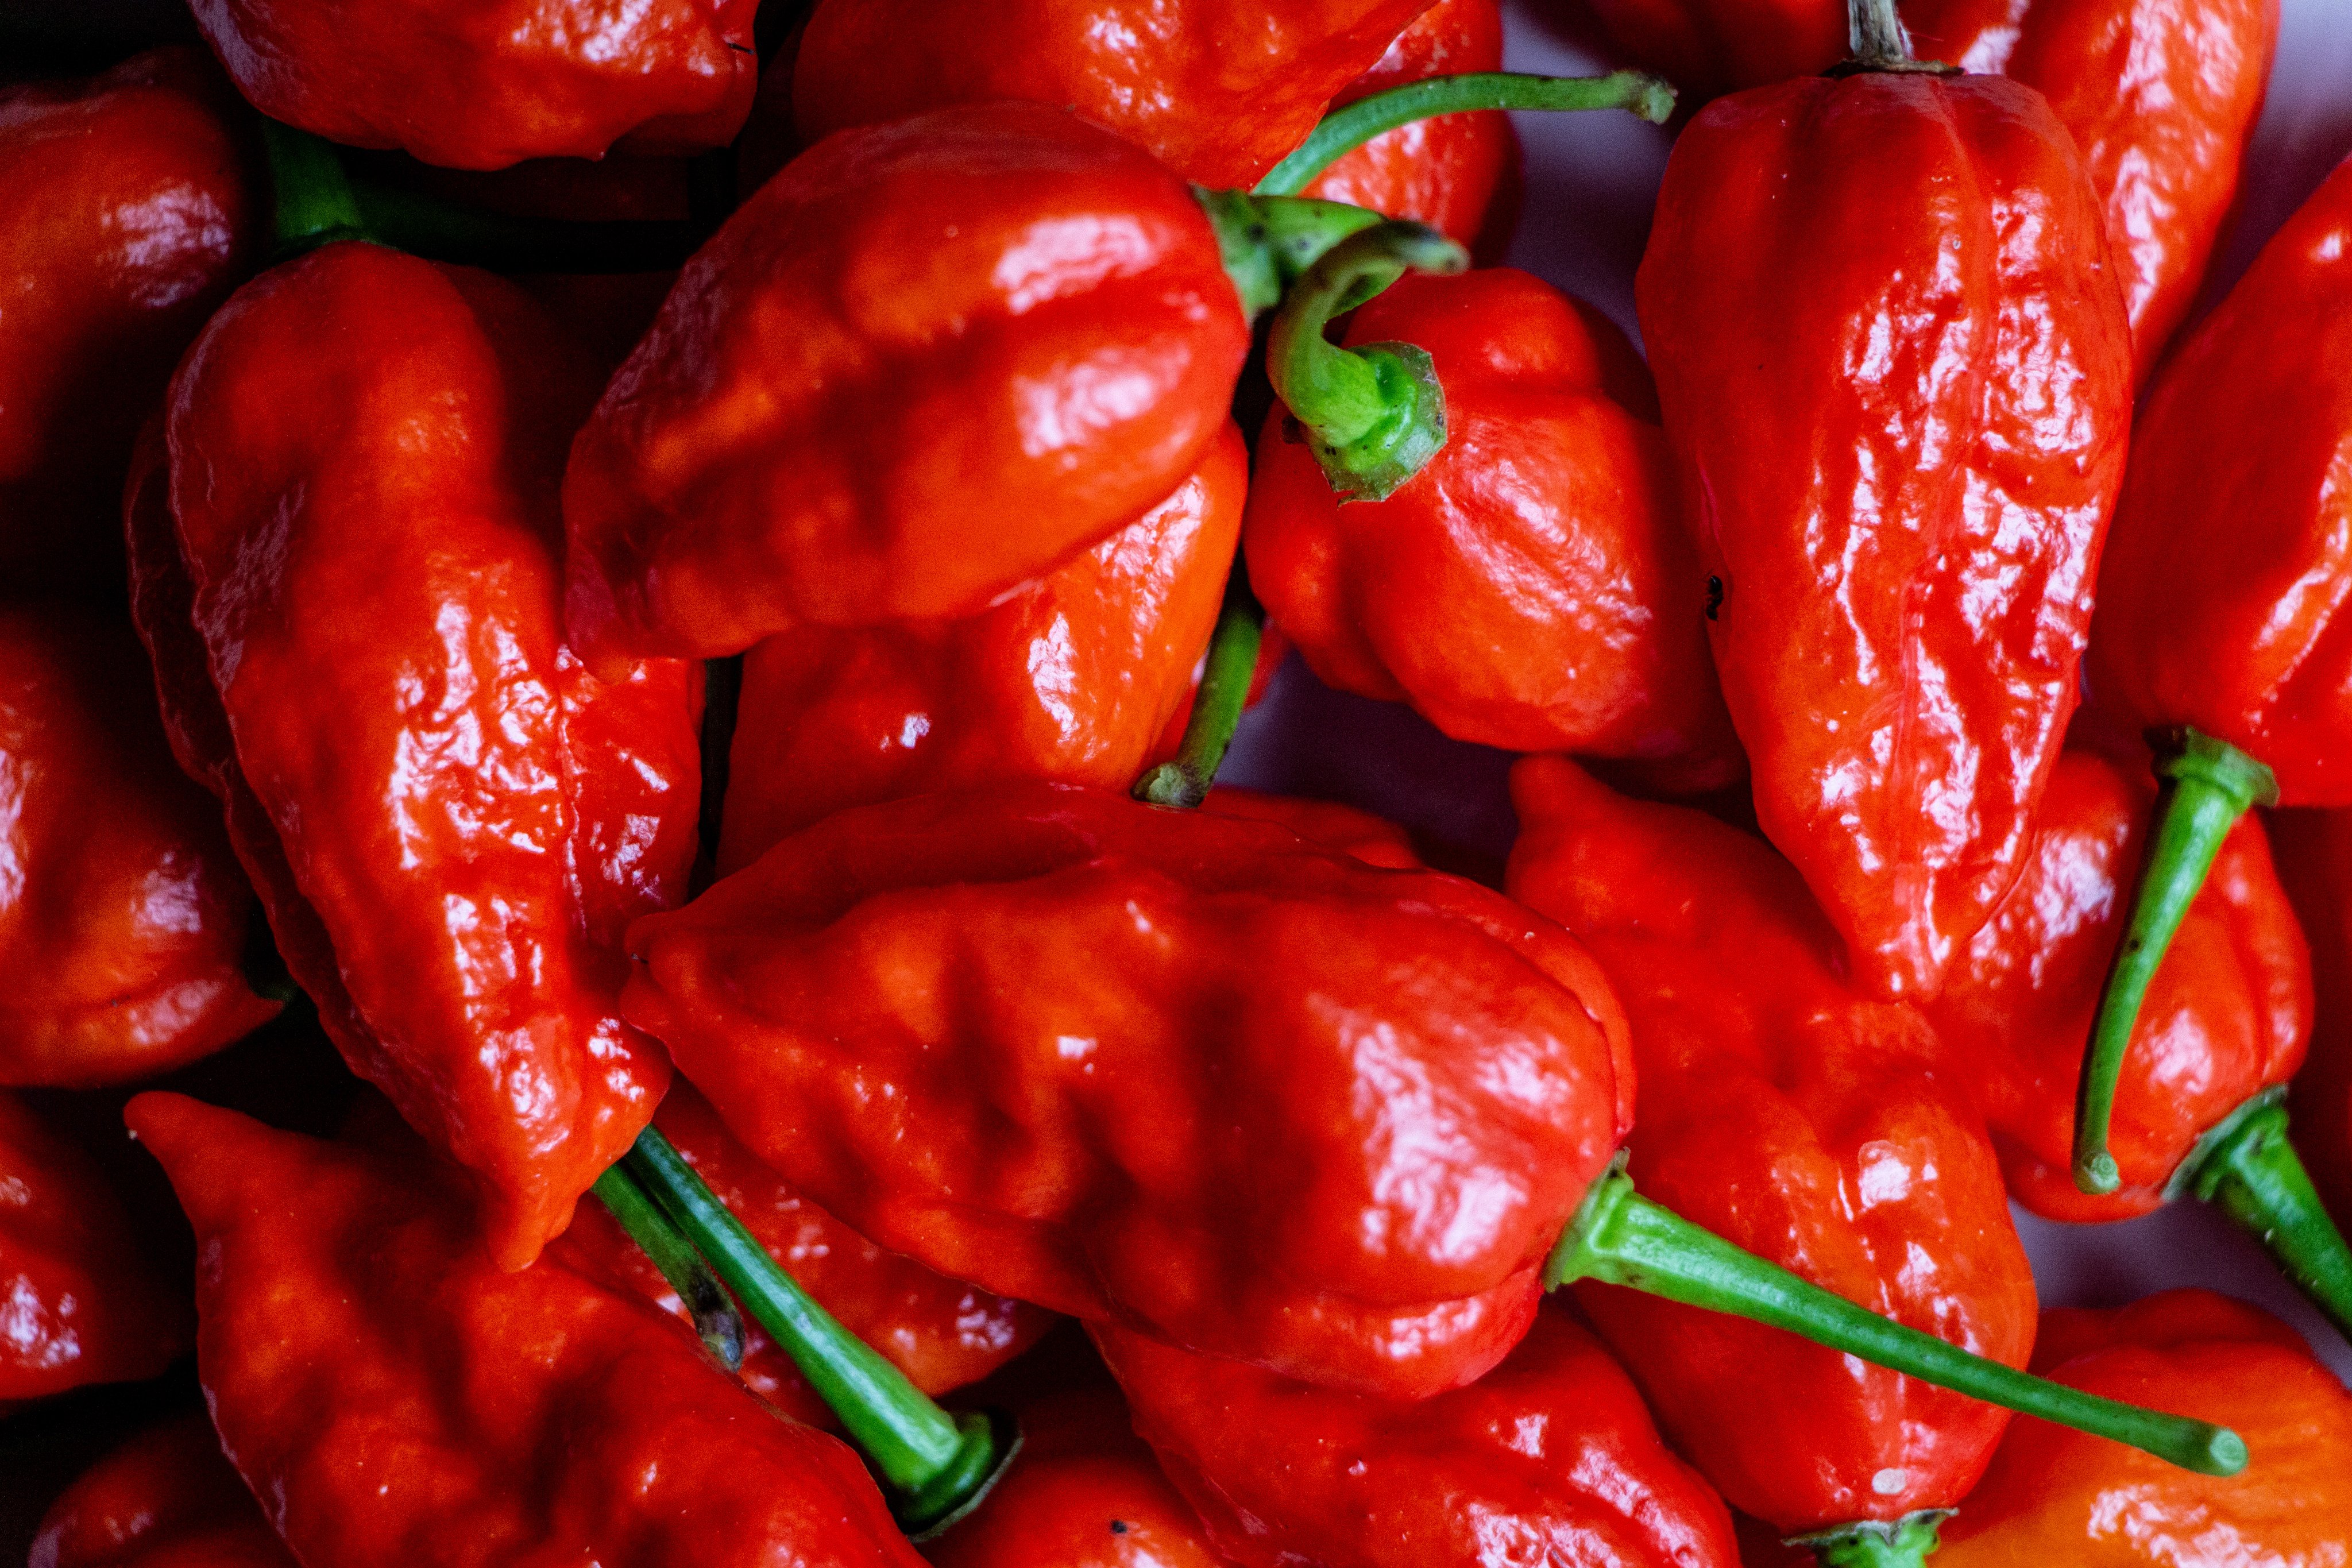 Carolina Reapers are officially the hottest peppers in the world, and should be treated with extreme caution. Photo: Getty Images